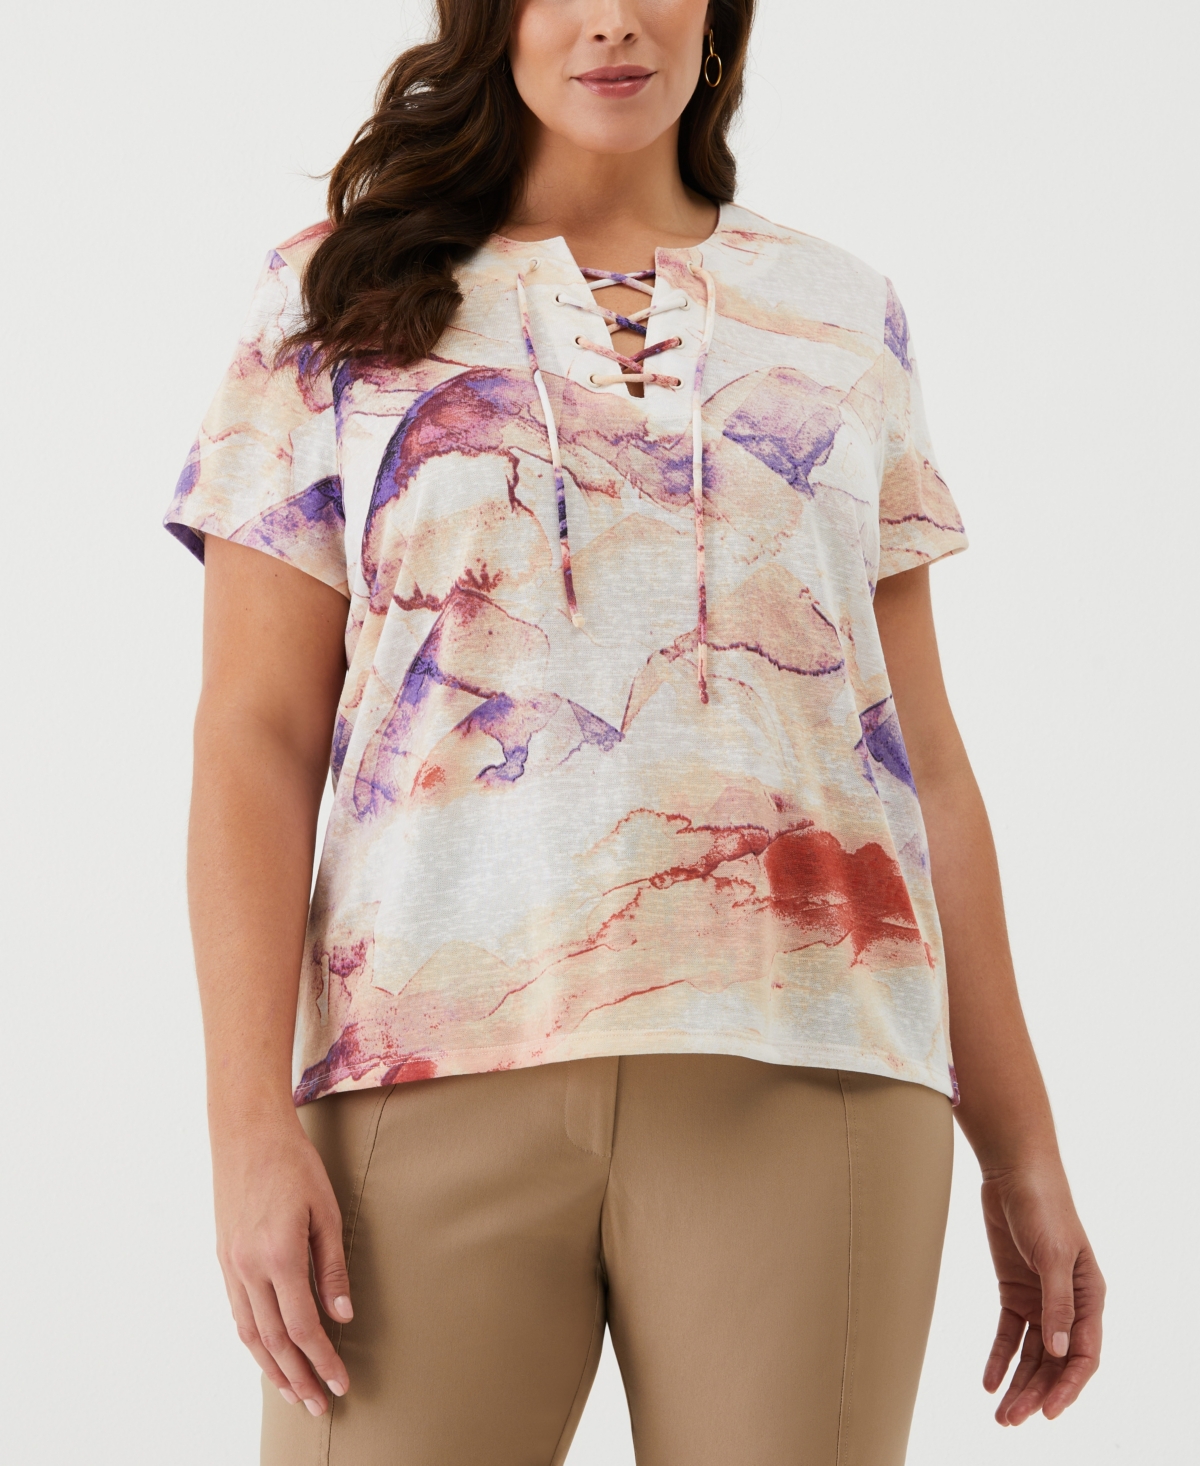 Plus Size Eco Watercolor Print Lace-Up Short Sleeve Tee Shirt - Honey Peach